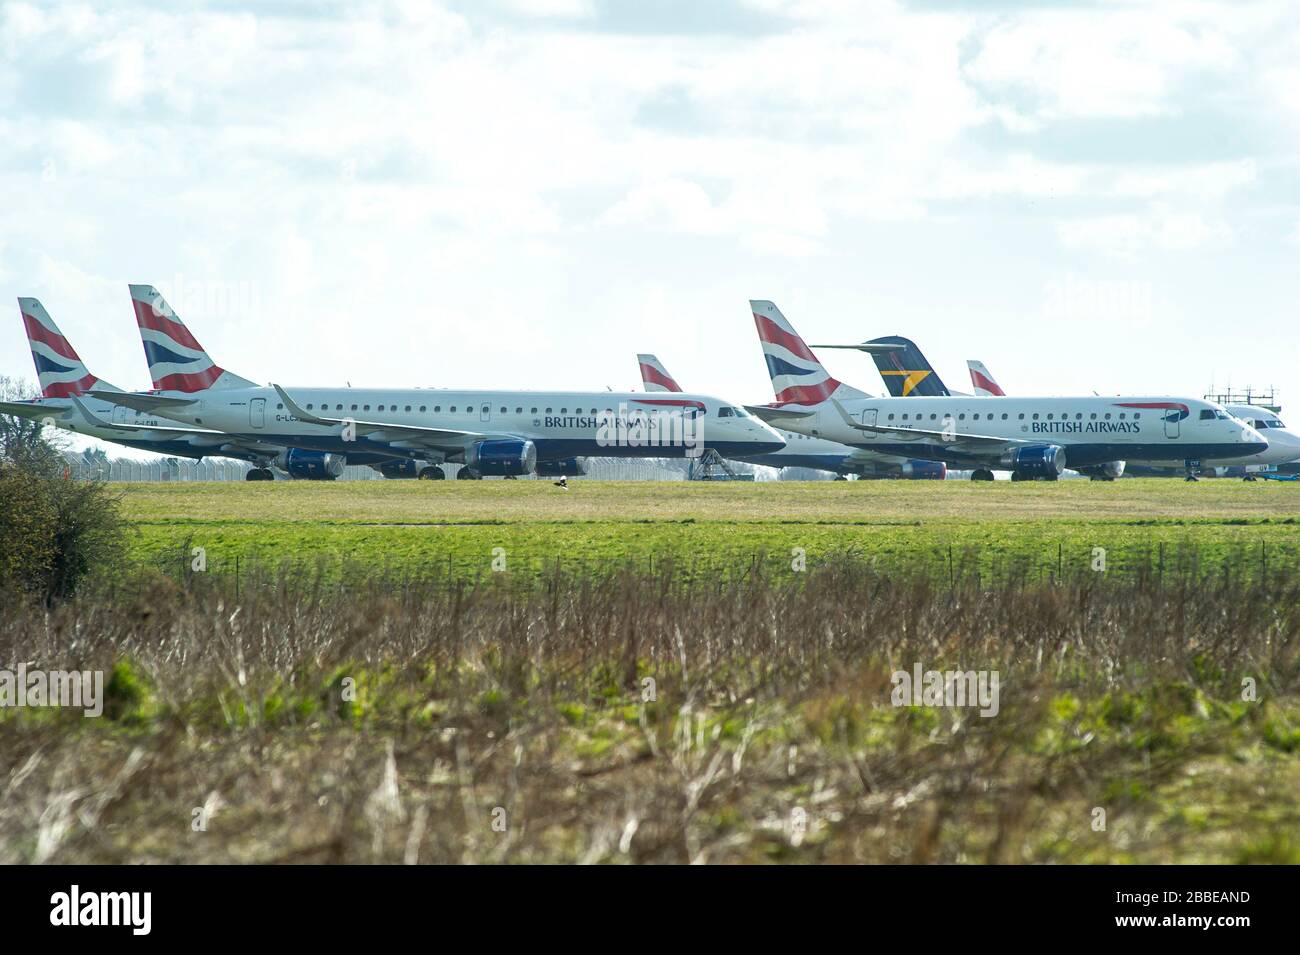 UK Coronavirus. Norwich International Airport, Norfolk, UK, 31st Mar 2020. Aircraft are being stored on the World War Two vintage perimeter tracks at Norwich International Airport to alleviate problems at at other UK airports due to flight cancellations caused by the Coronavirus outbreak.  Credit Jason Bye/Alamy Live News Stock Photo